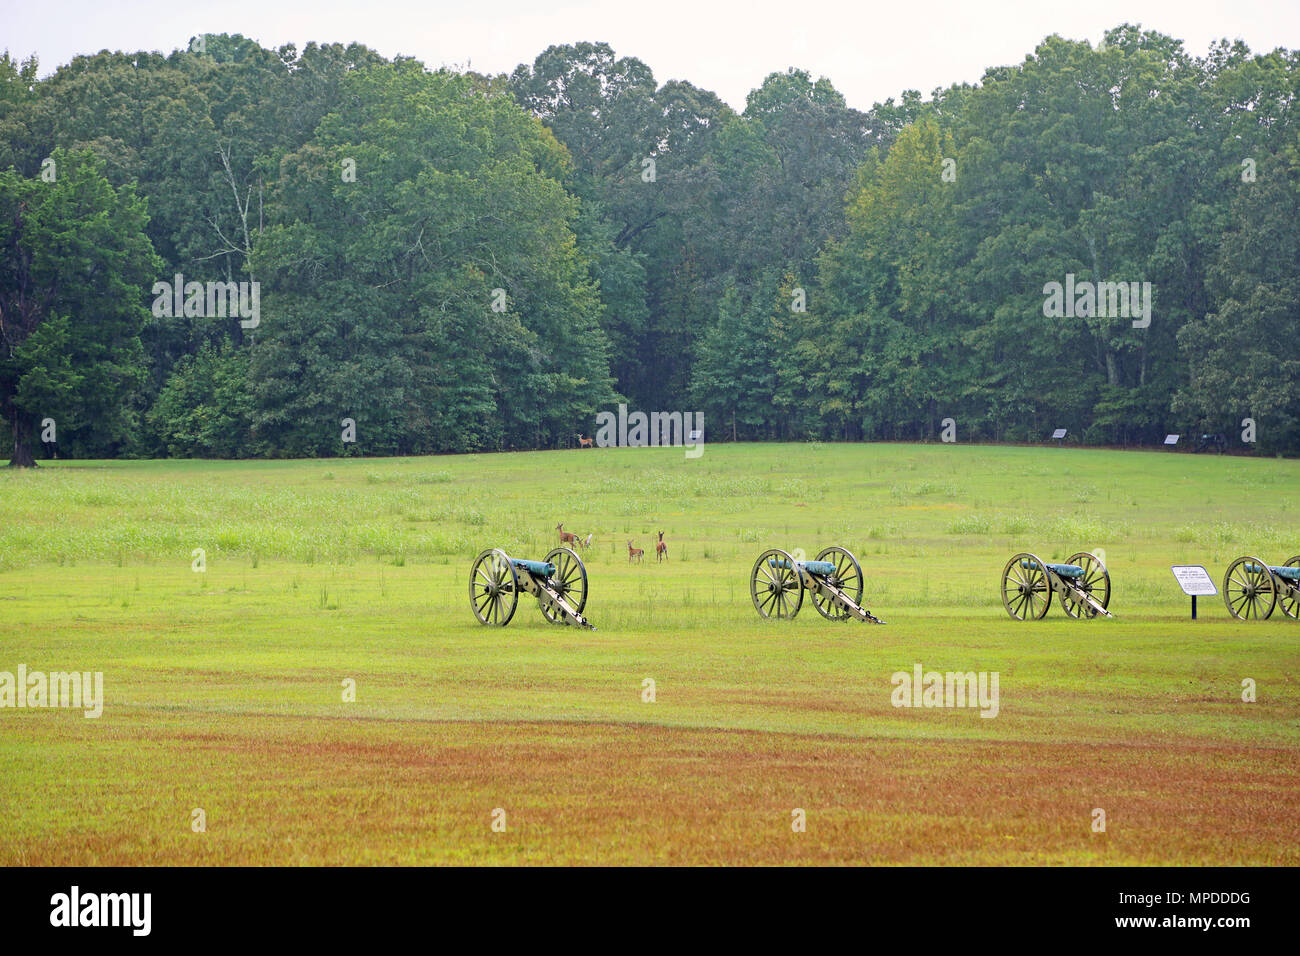 Cannon and deer on battlefield - Shiloh National Military Park, Tennessee Stock Photo